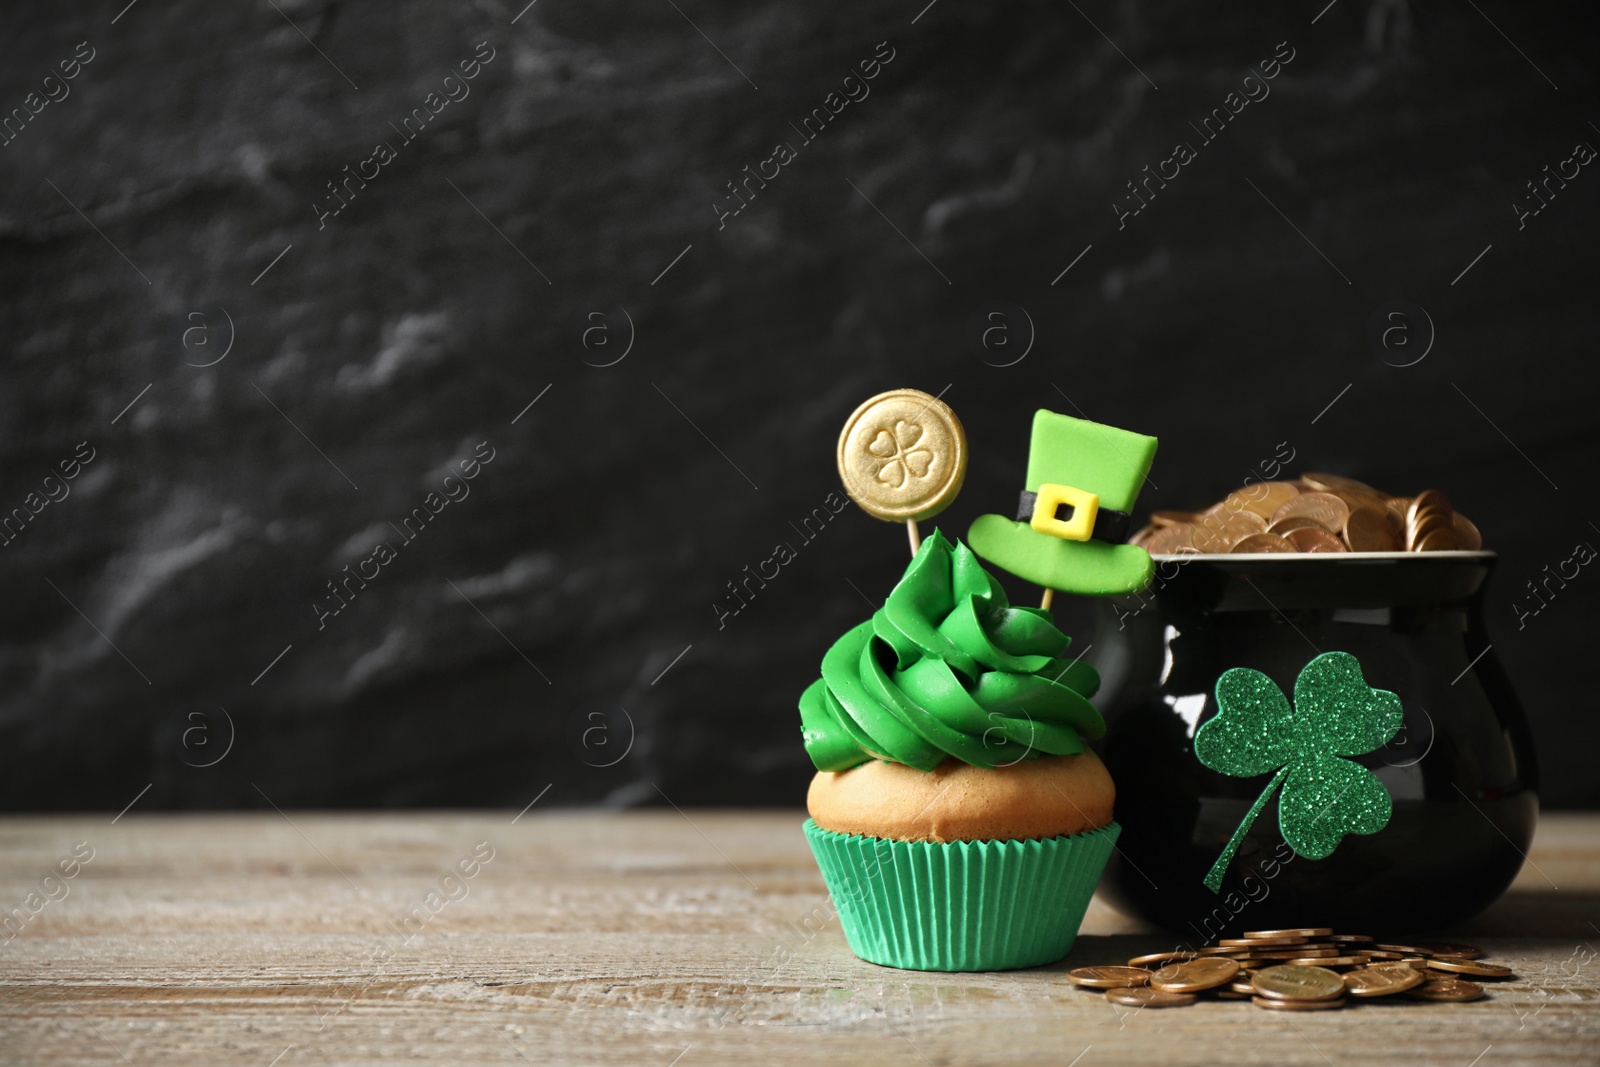 Photo of Decorated cupcake and pot with gold coins on wooden table, space for text. St. Patrick's Day celebration